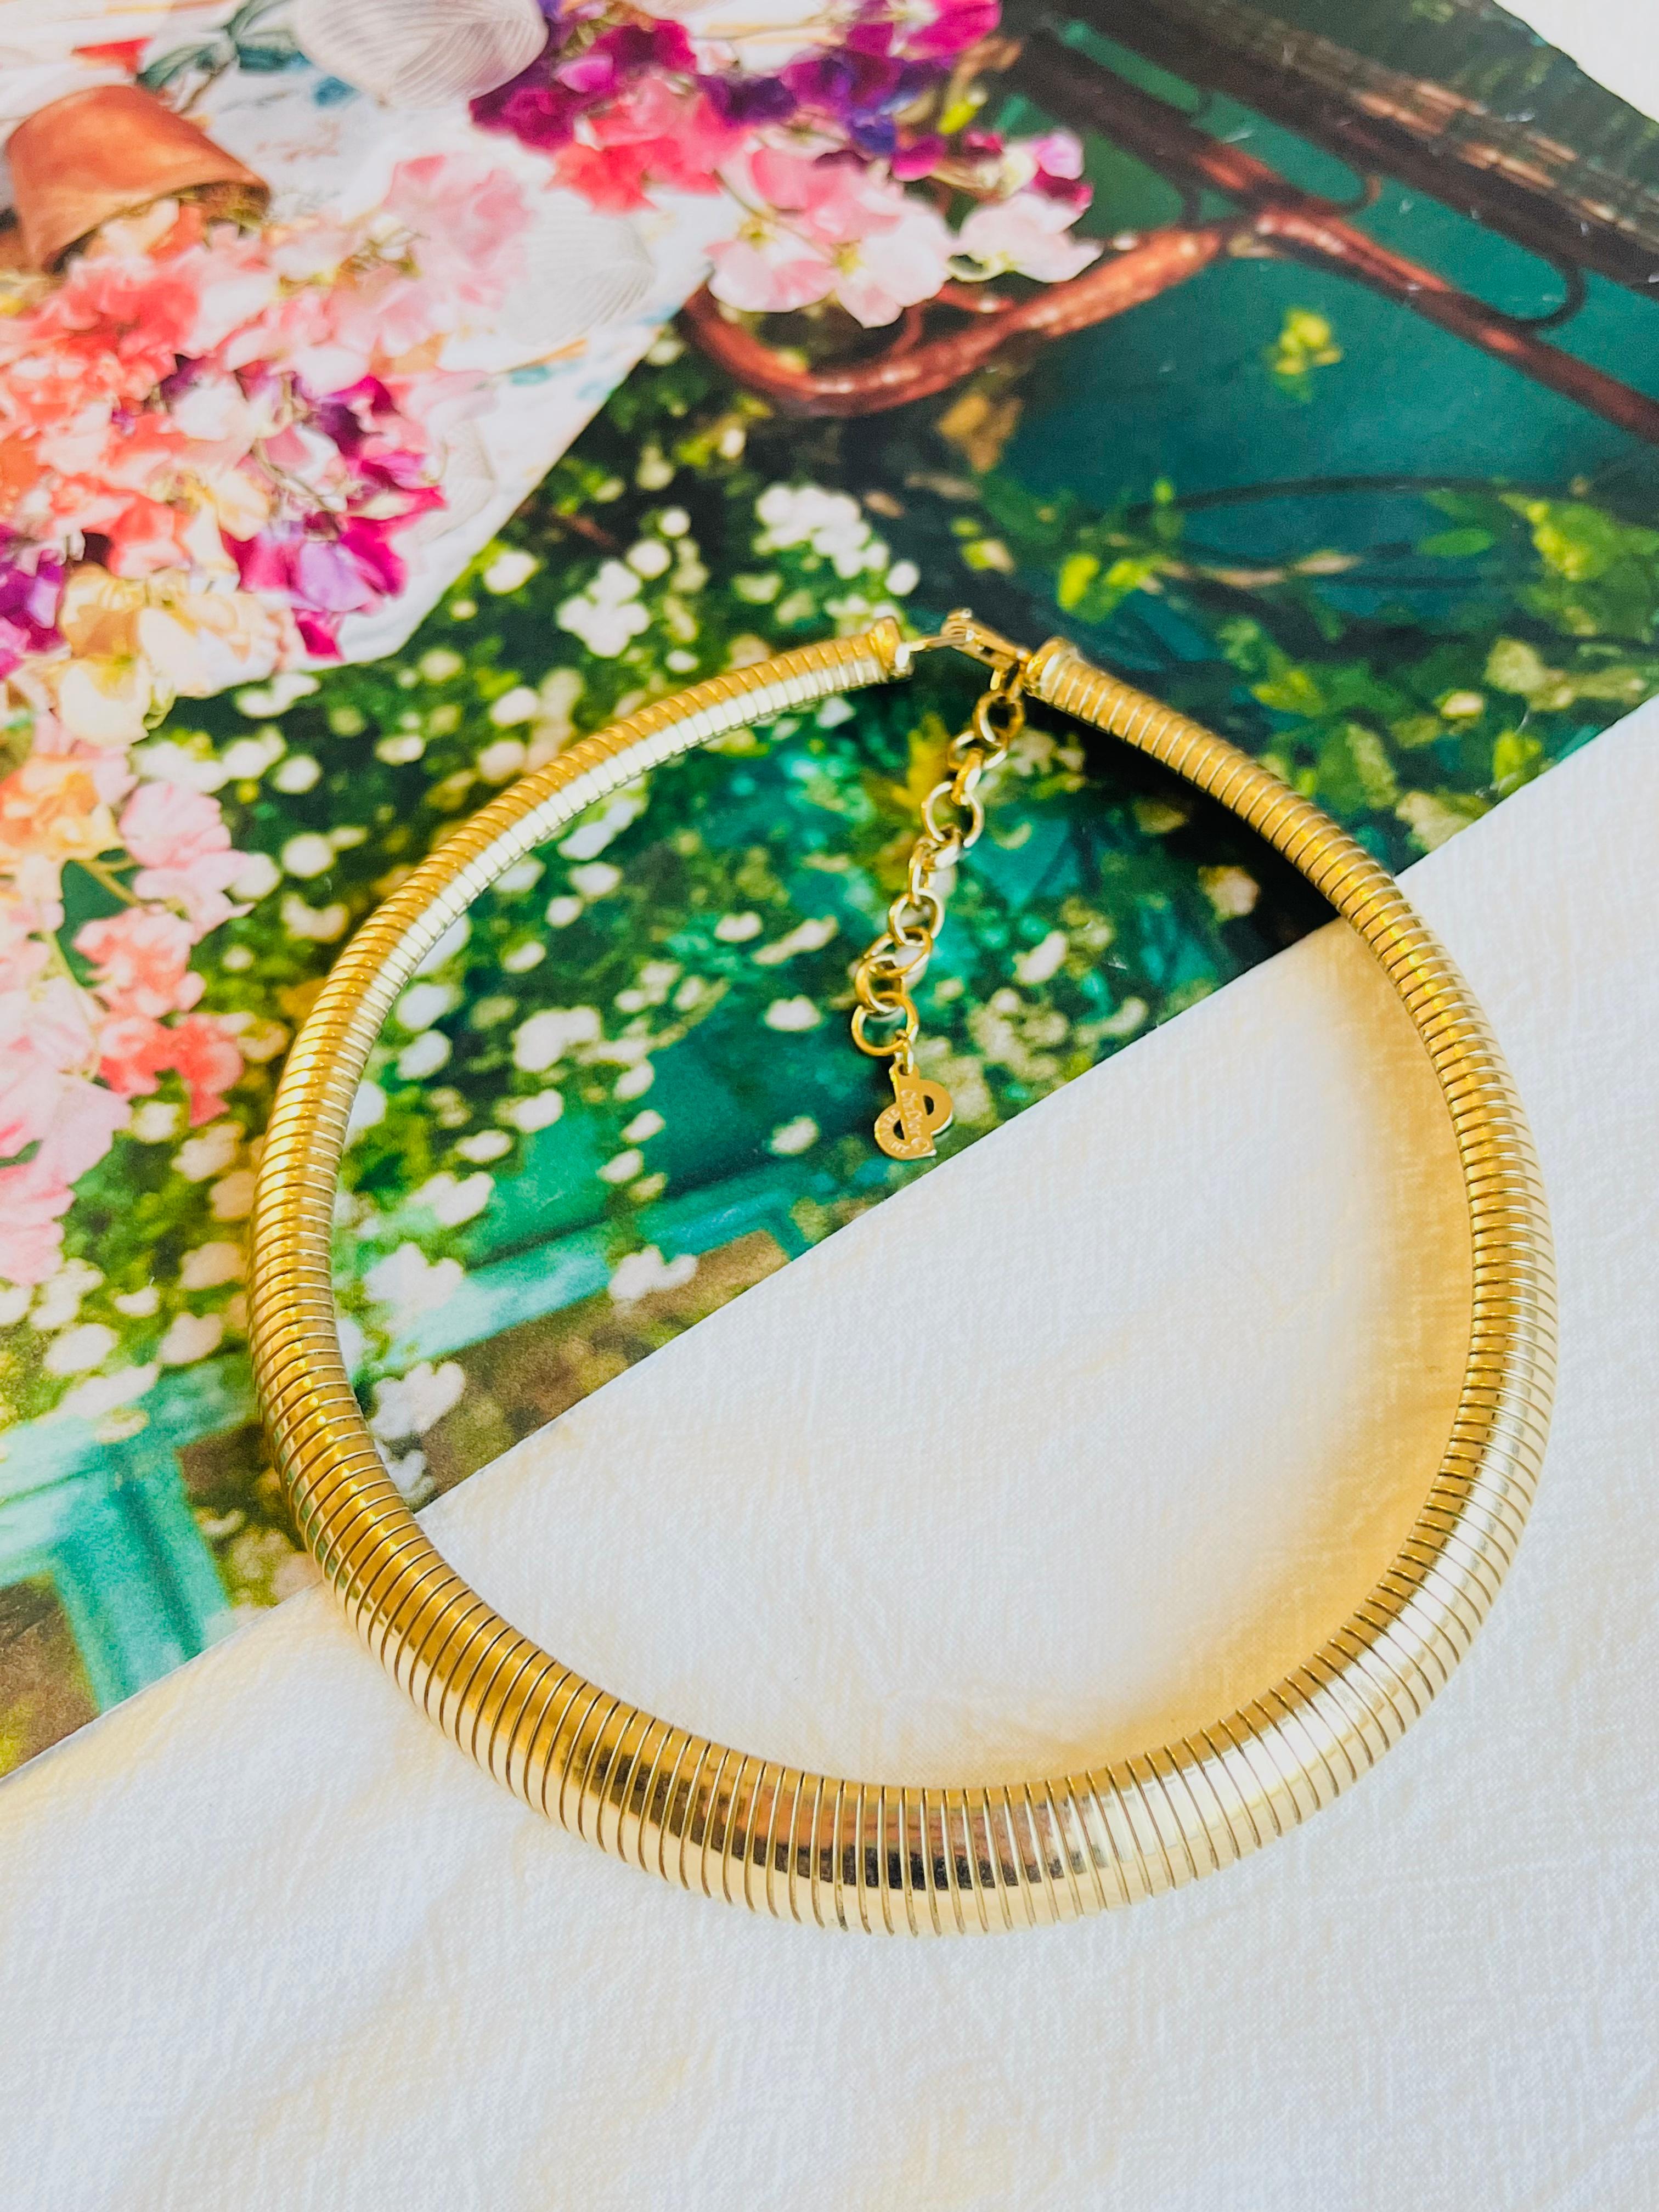 Very excellent condition. Not any colour loss. 100% Genuine.

Crafted from polished gold plated with a circular design, this choker necklace from Christian Dior is finished with a ribbed textured effect.

Marked 'Chr.Dior (C) '. Rare to